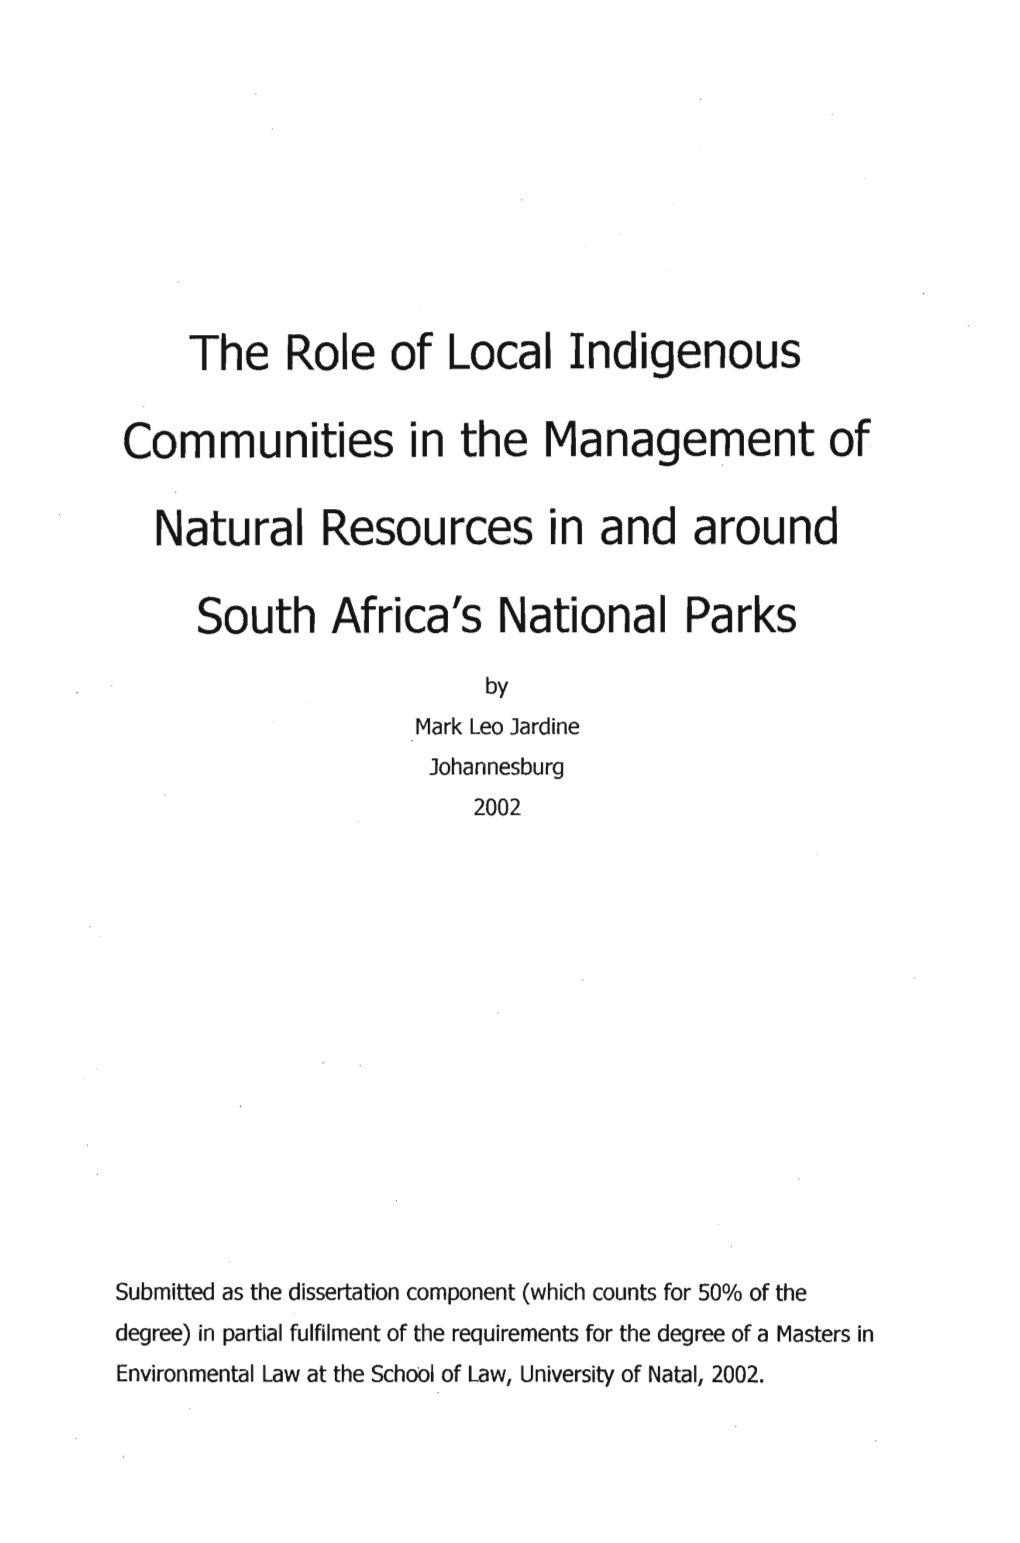 'Lent of Natural Resources in and Around South Africa's National Parks